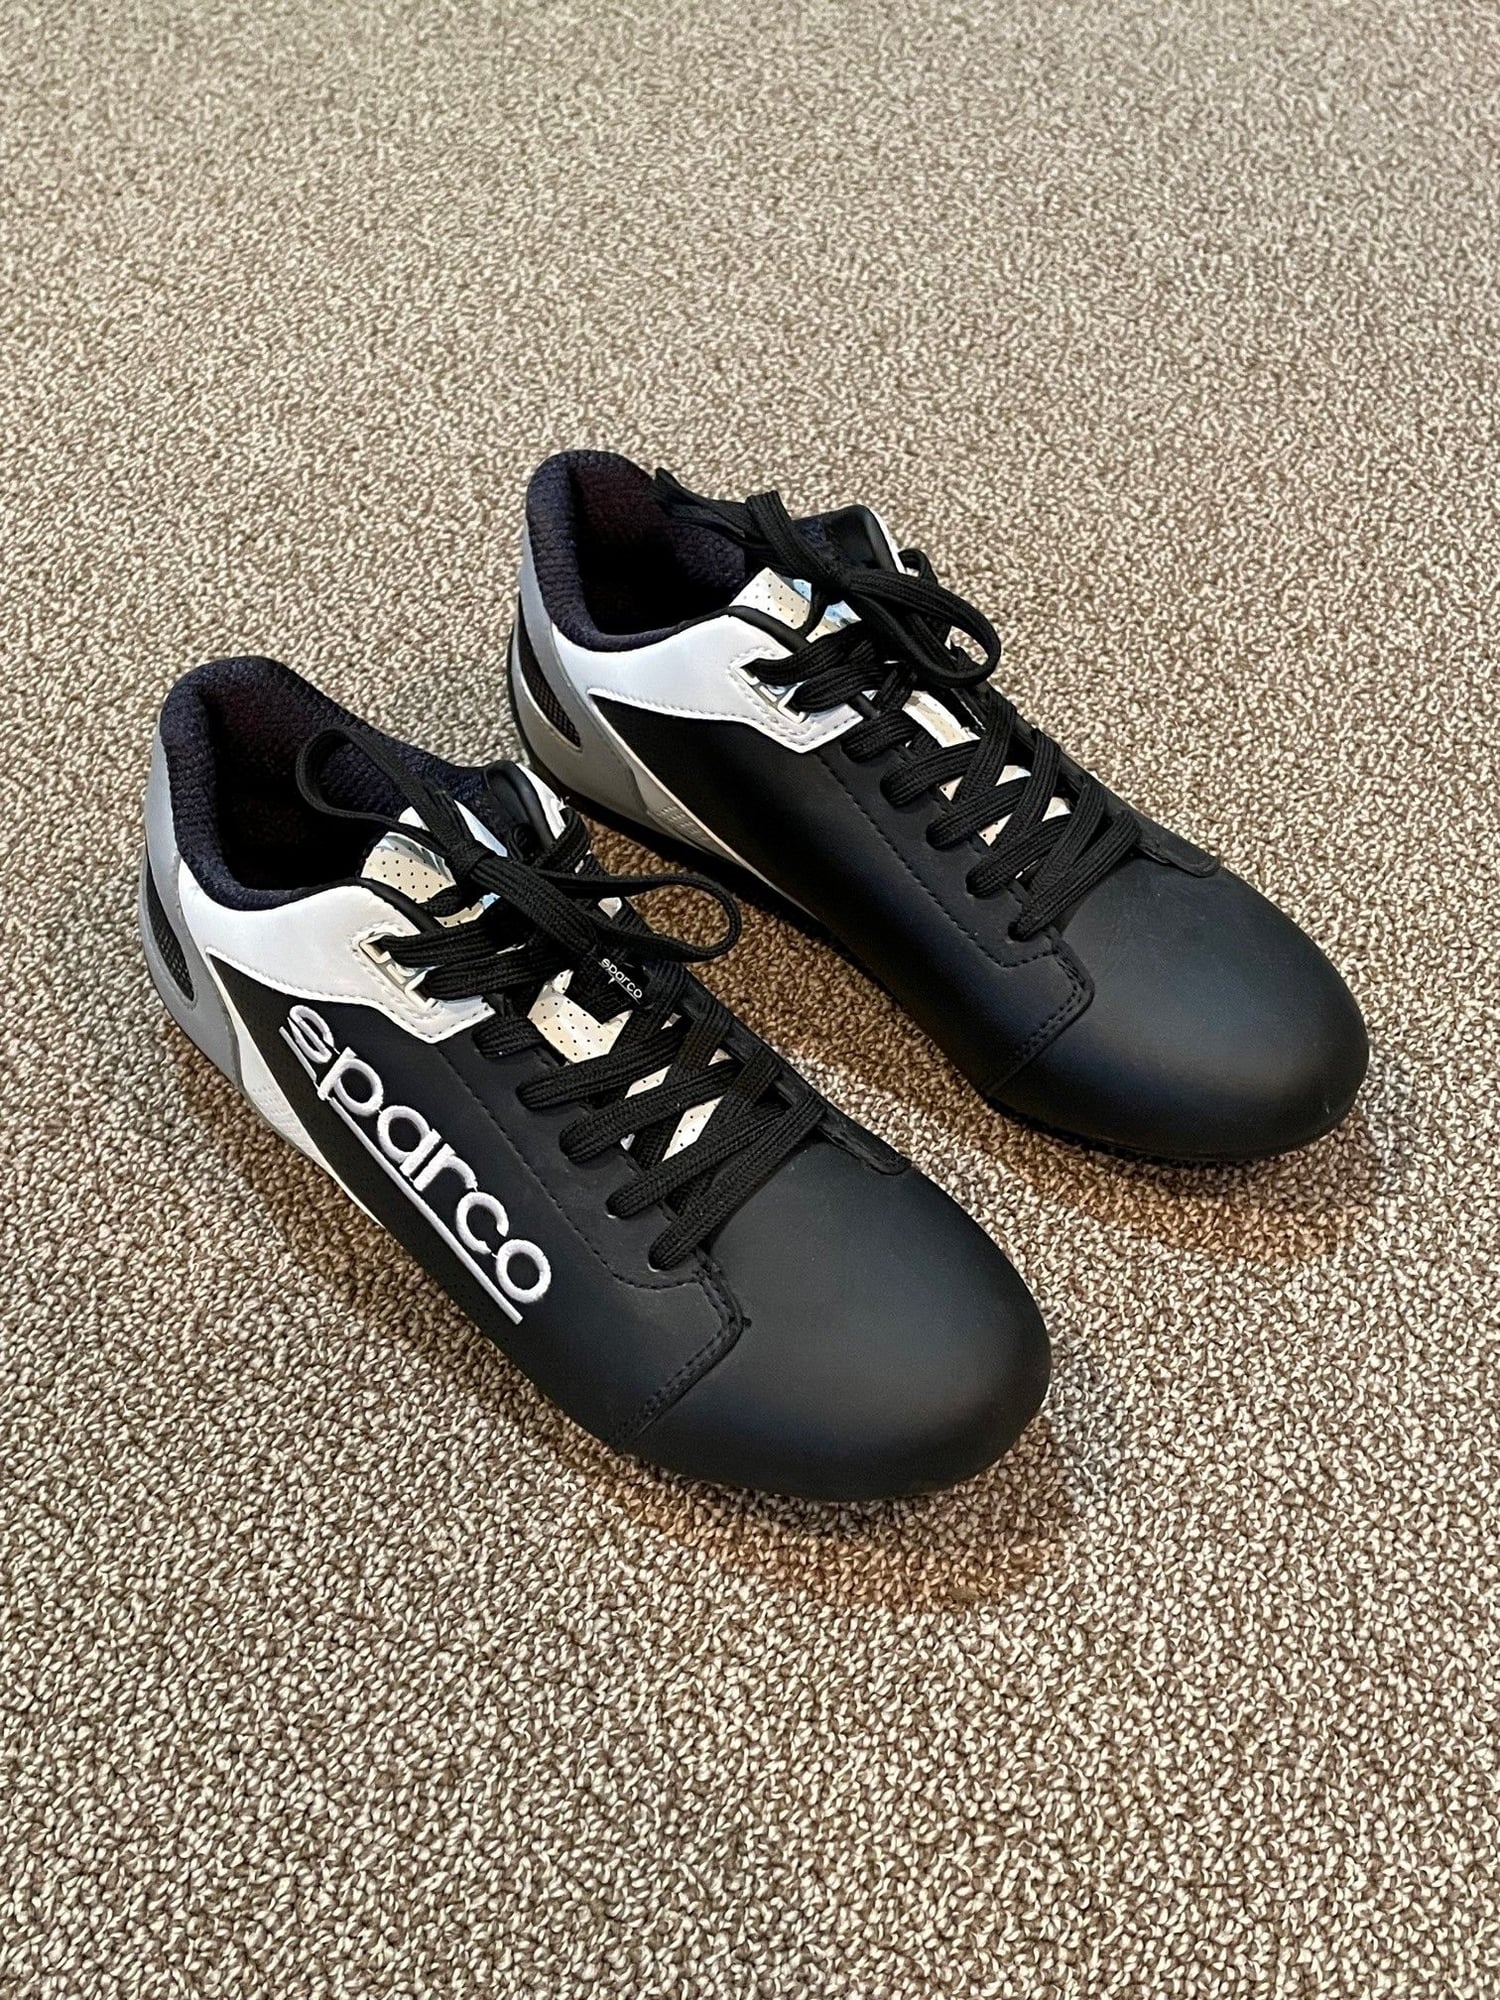 Sparco SL-17 Driving Shoe